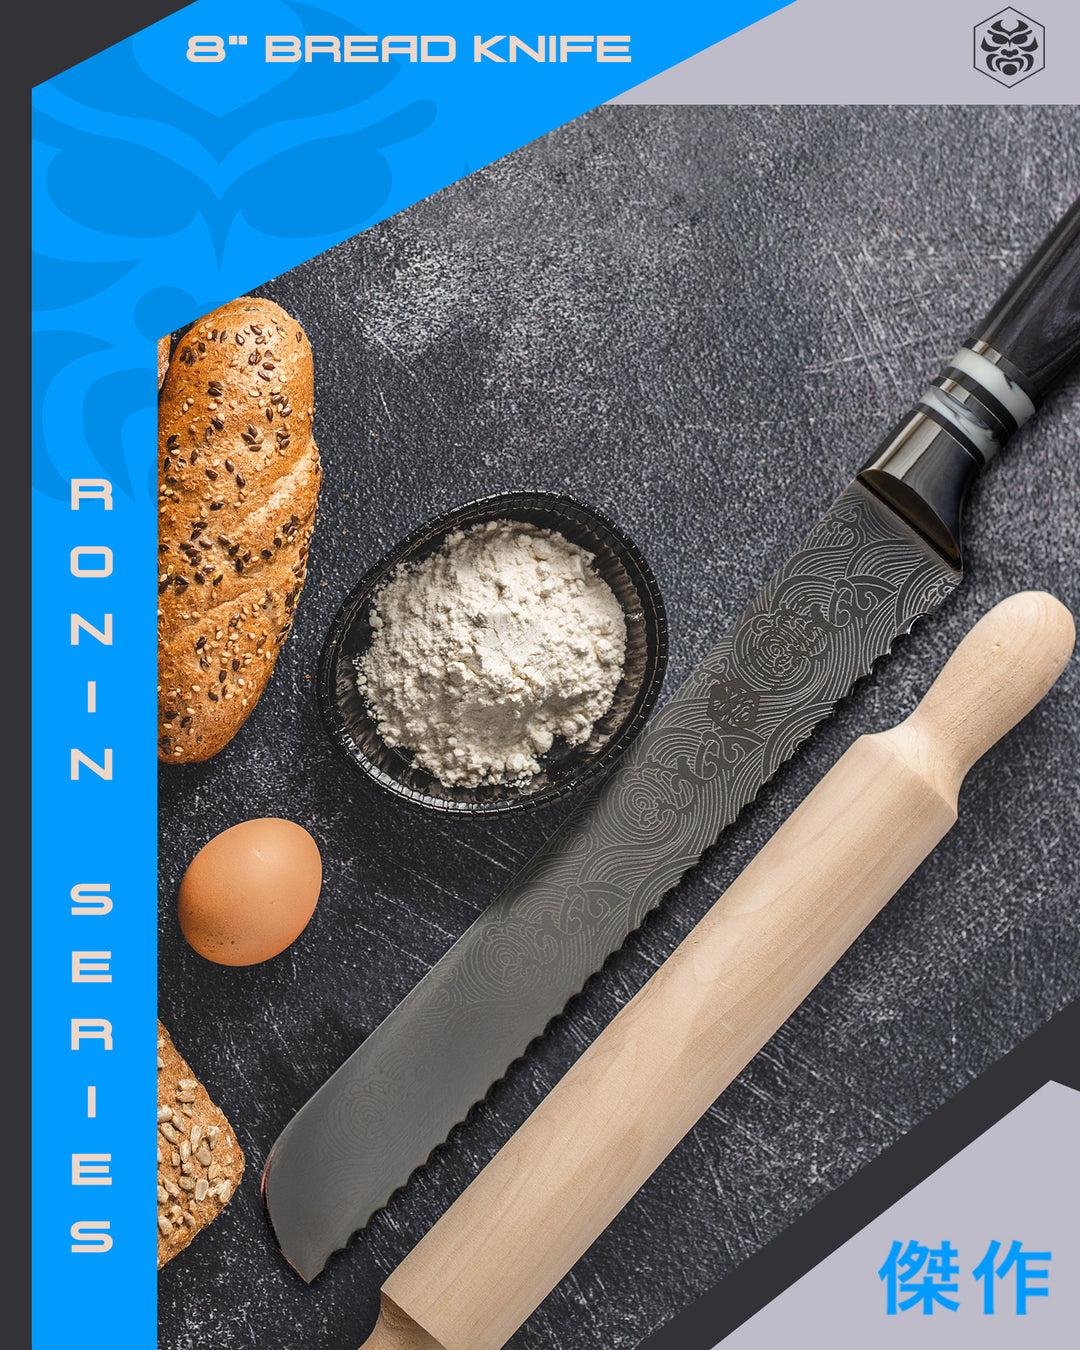 The Ronin Bread Knife next to a rolling pin, cup of flour, egg, whole grain breads, homemade pretzel, and croissants.